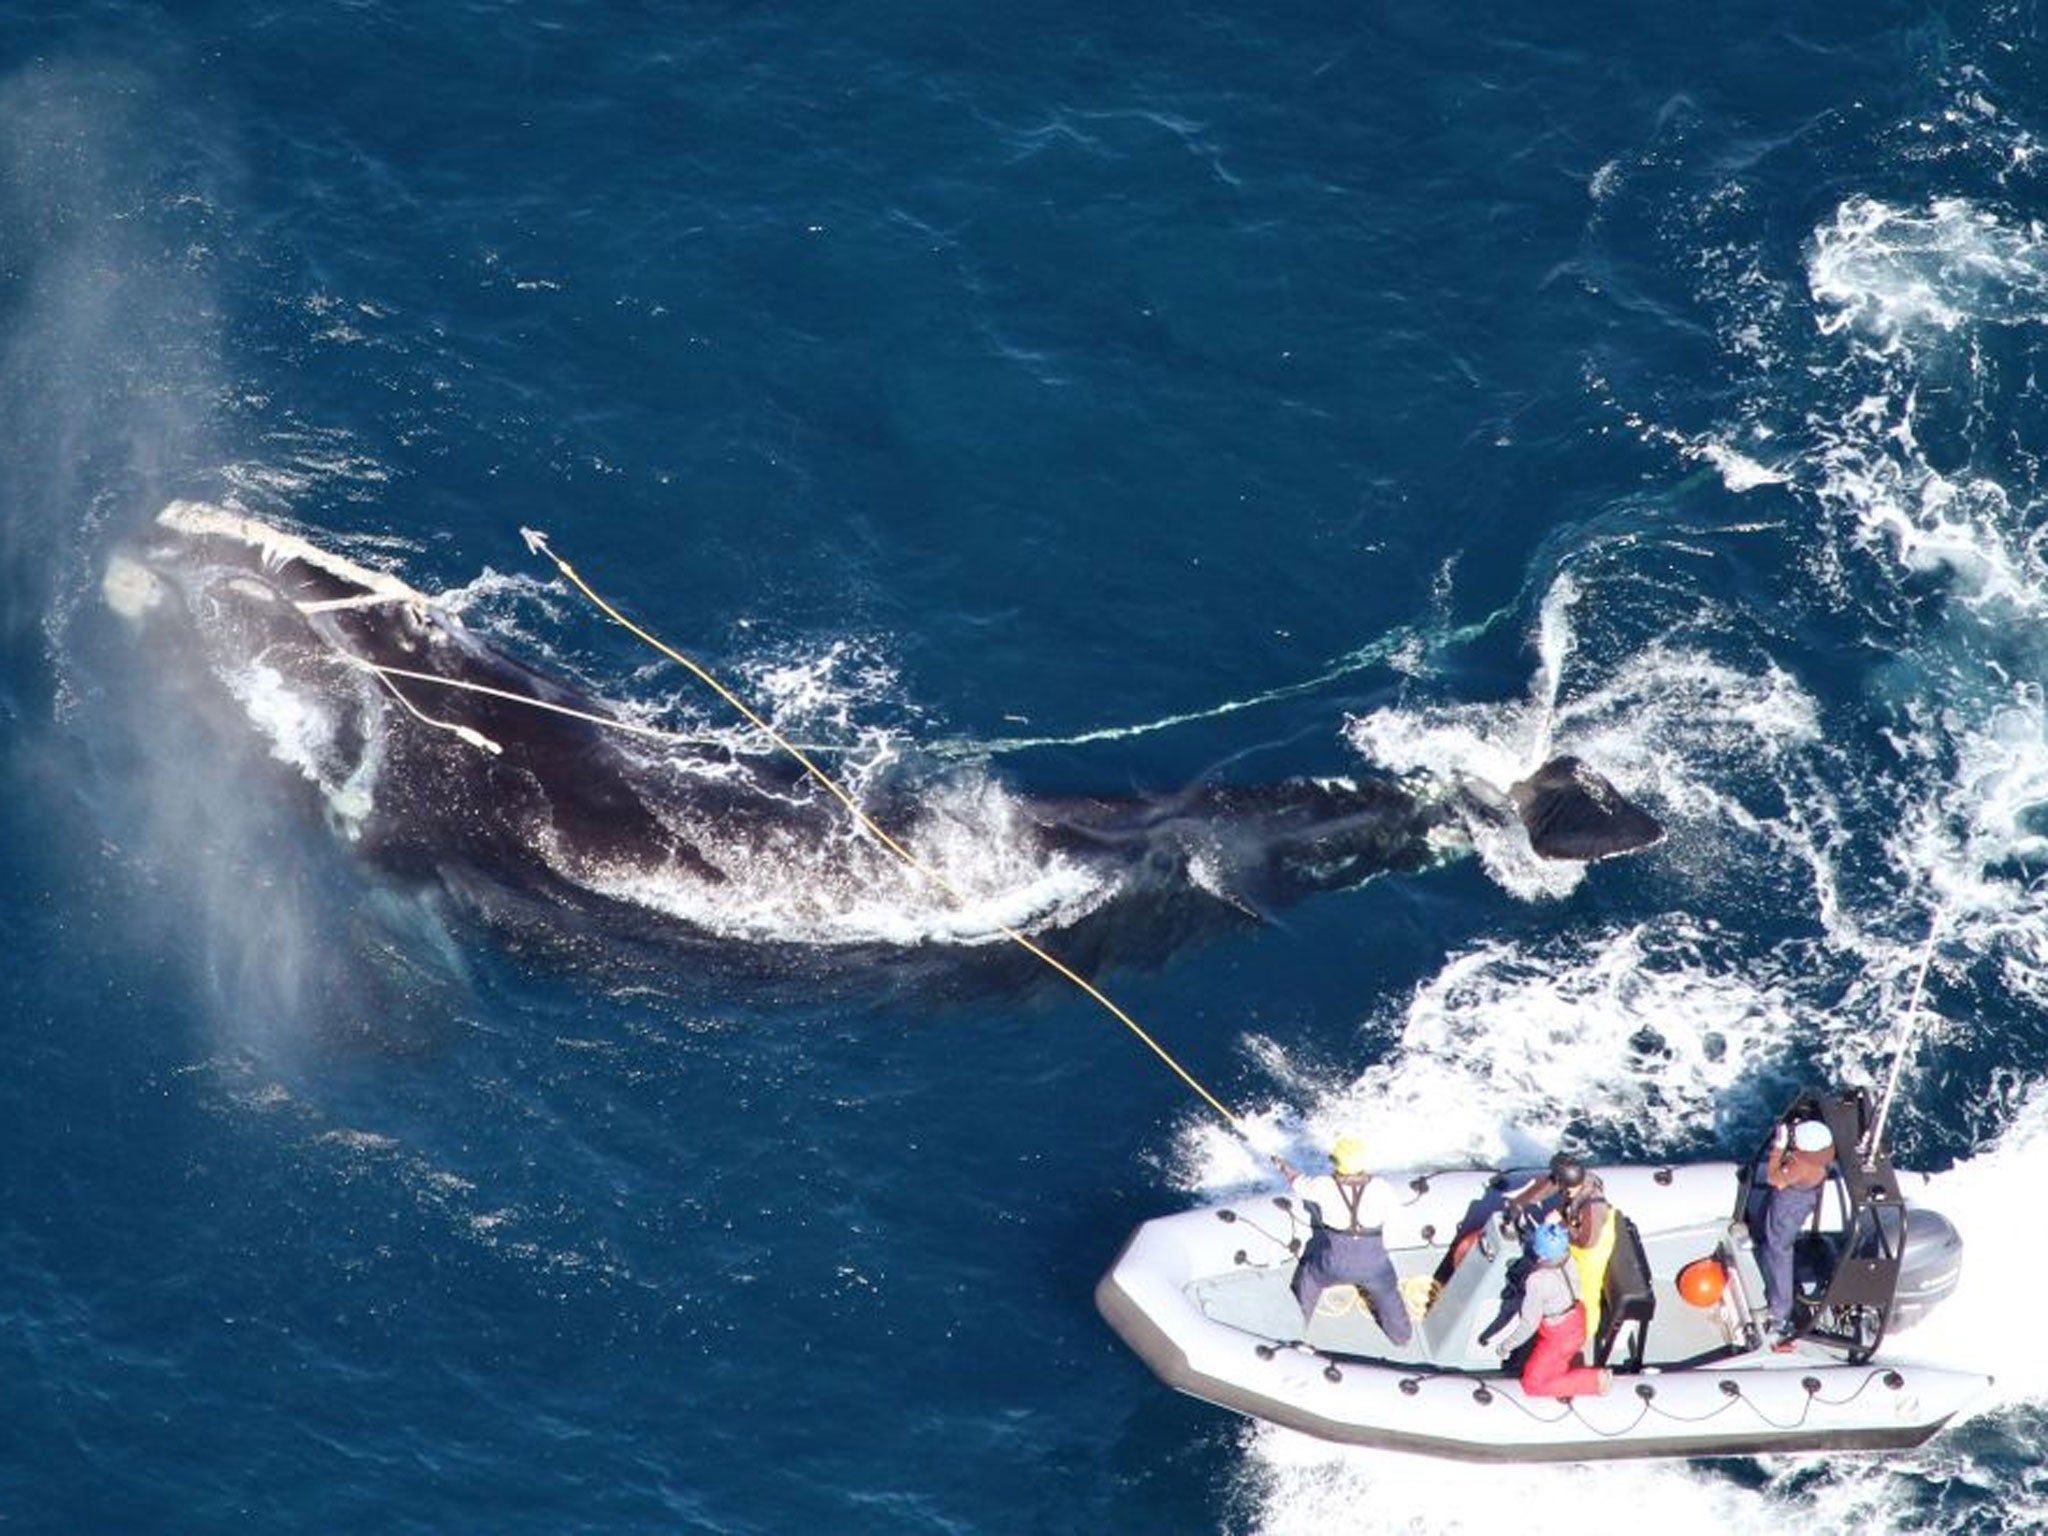 Members of the Georgia DNR and Florida Fish and Wildlife Conservation Commission try and untangle an endangered right whale